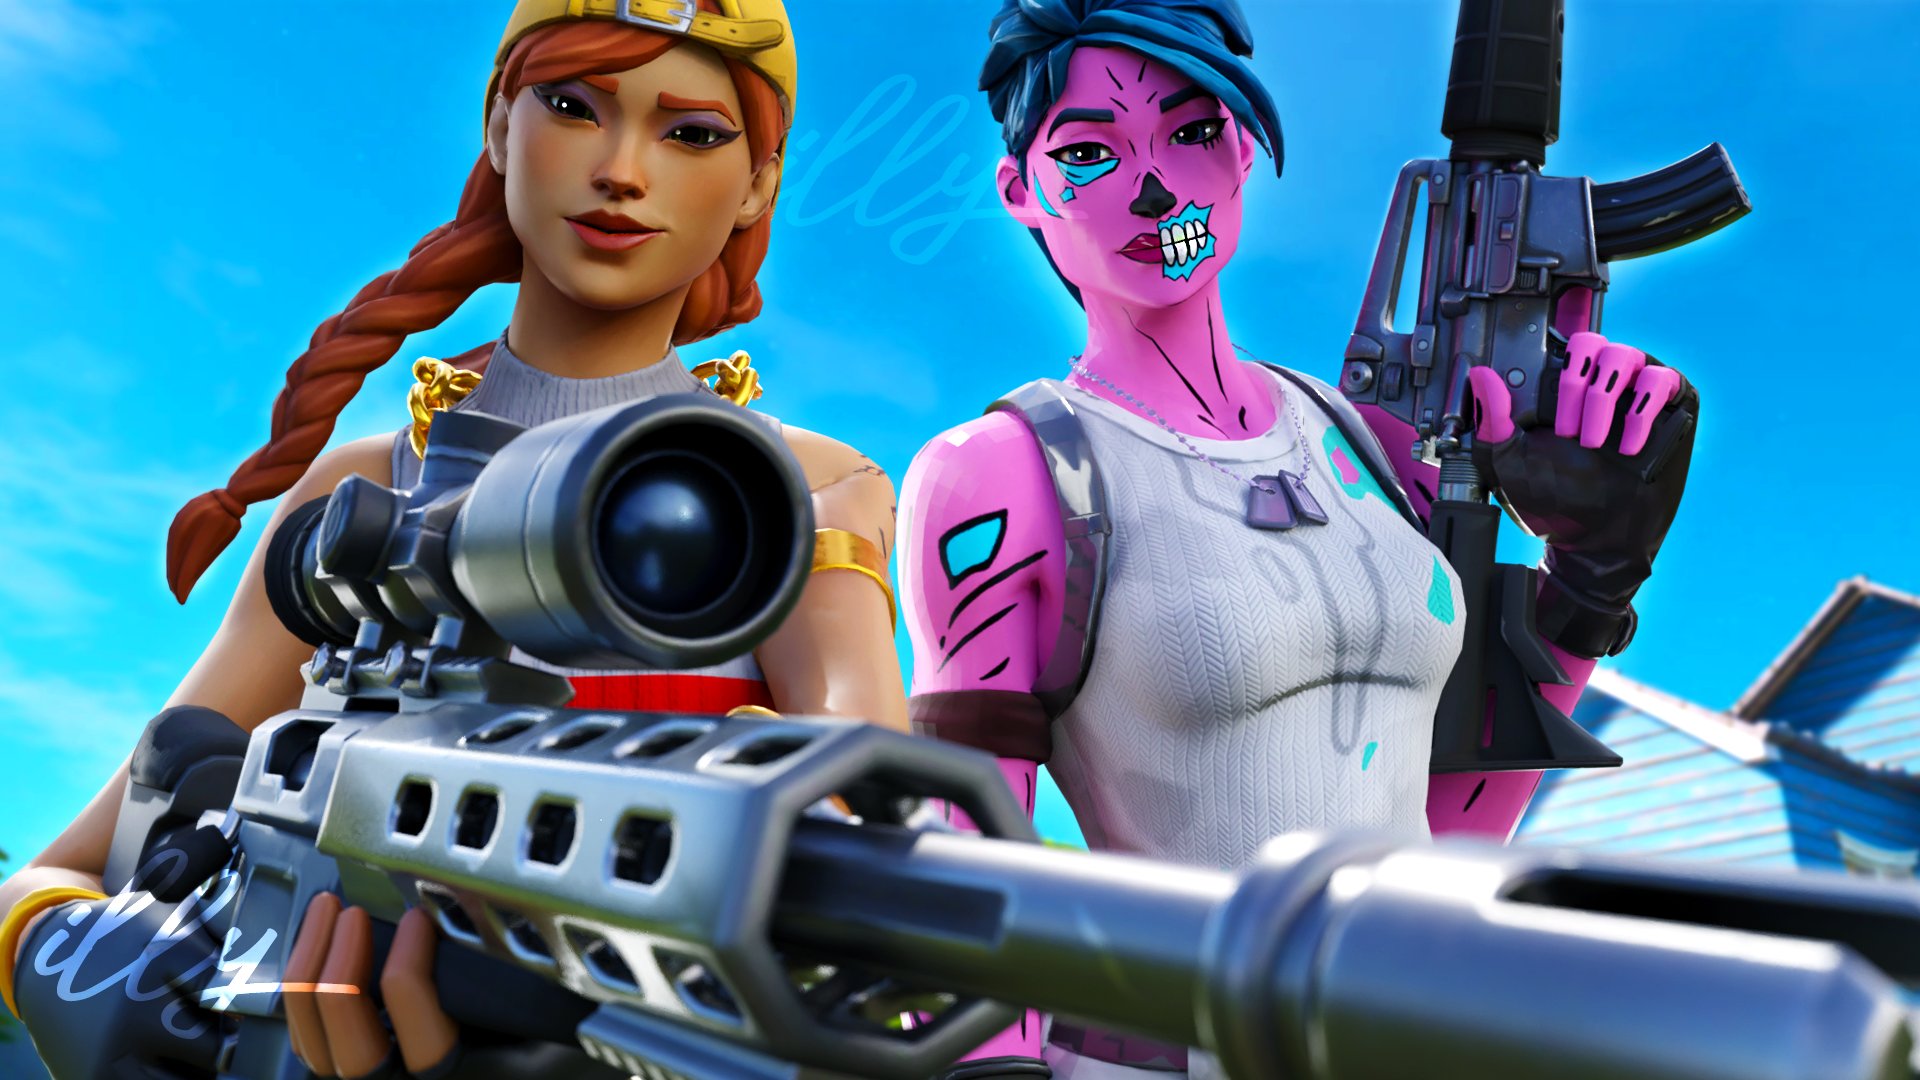 Illy Recent Fortnite Thumbnail Likes Amp Retweets Appreciated Portfolio T Co Rzxdl2tnh8 Dm For Prices T Co Rqwmzrqpwl Twitter